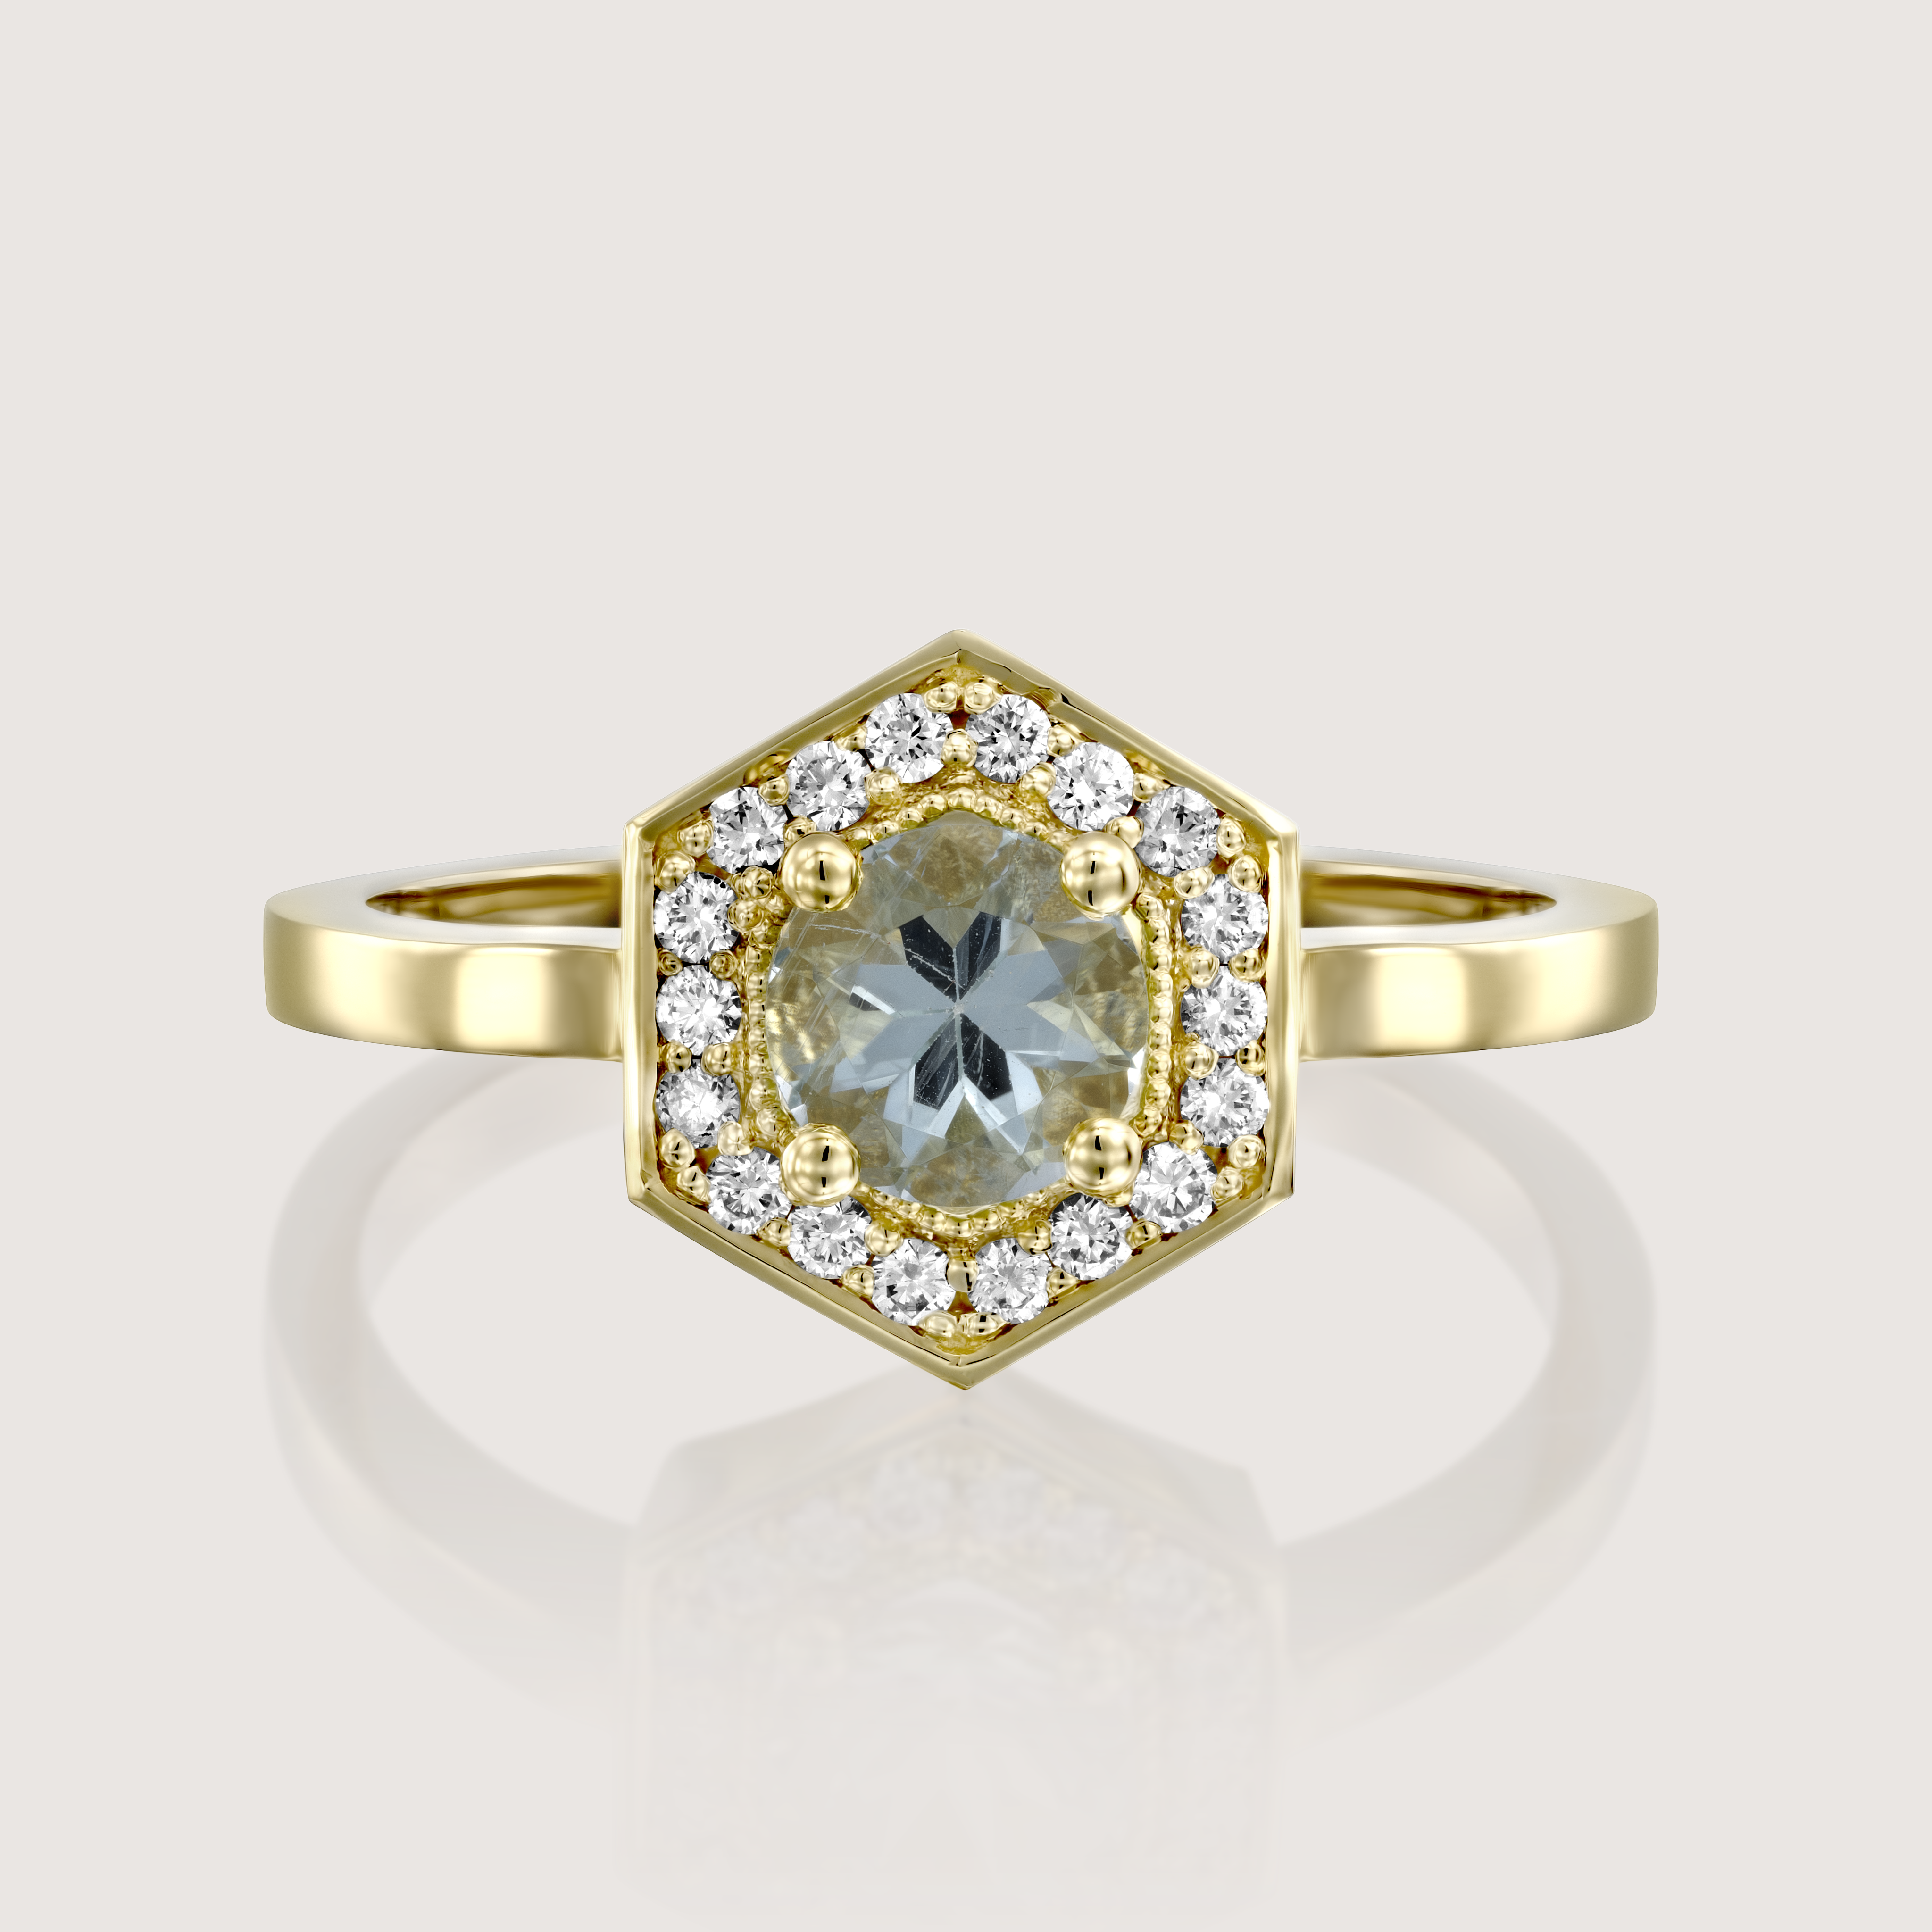 Amy Gold Ring with Aquamarine